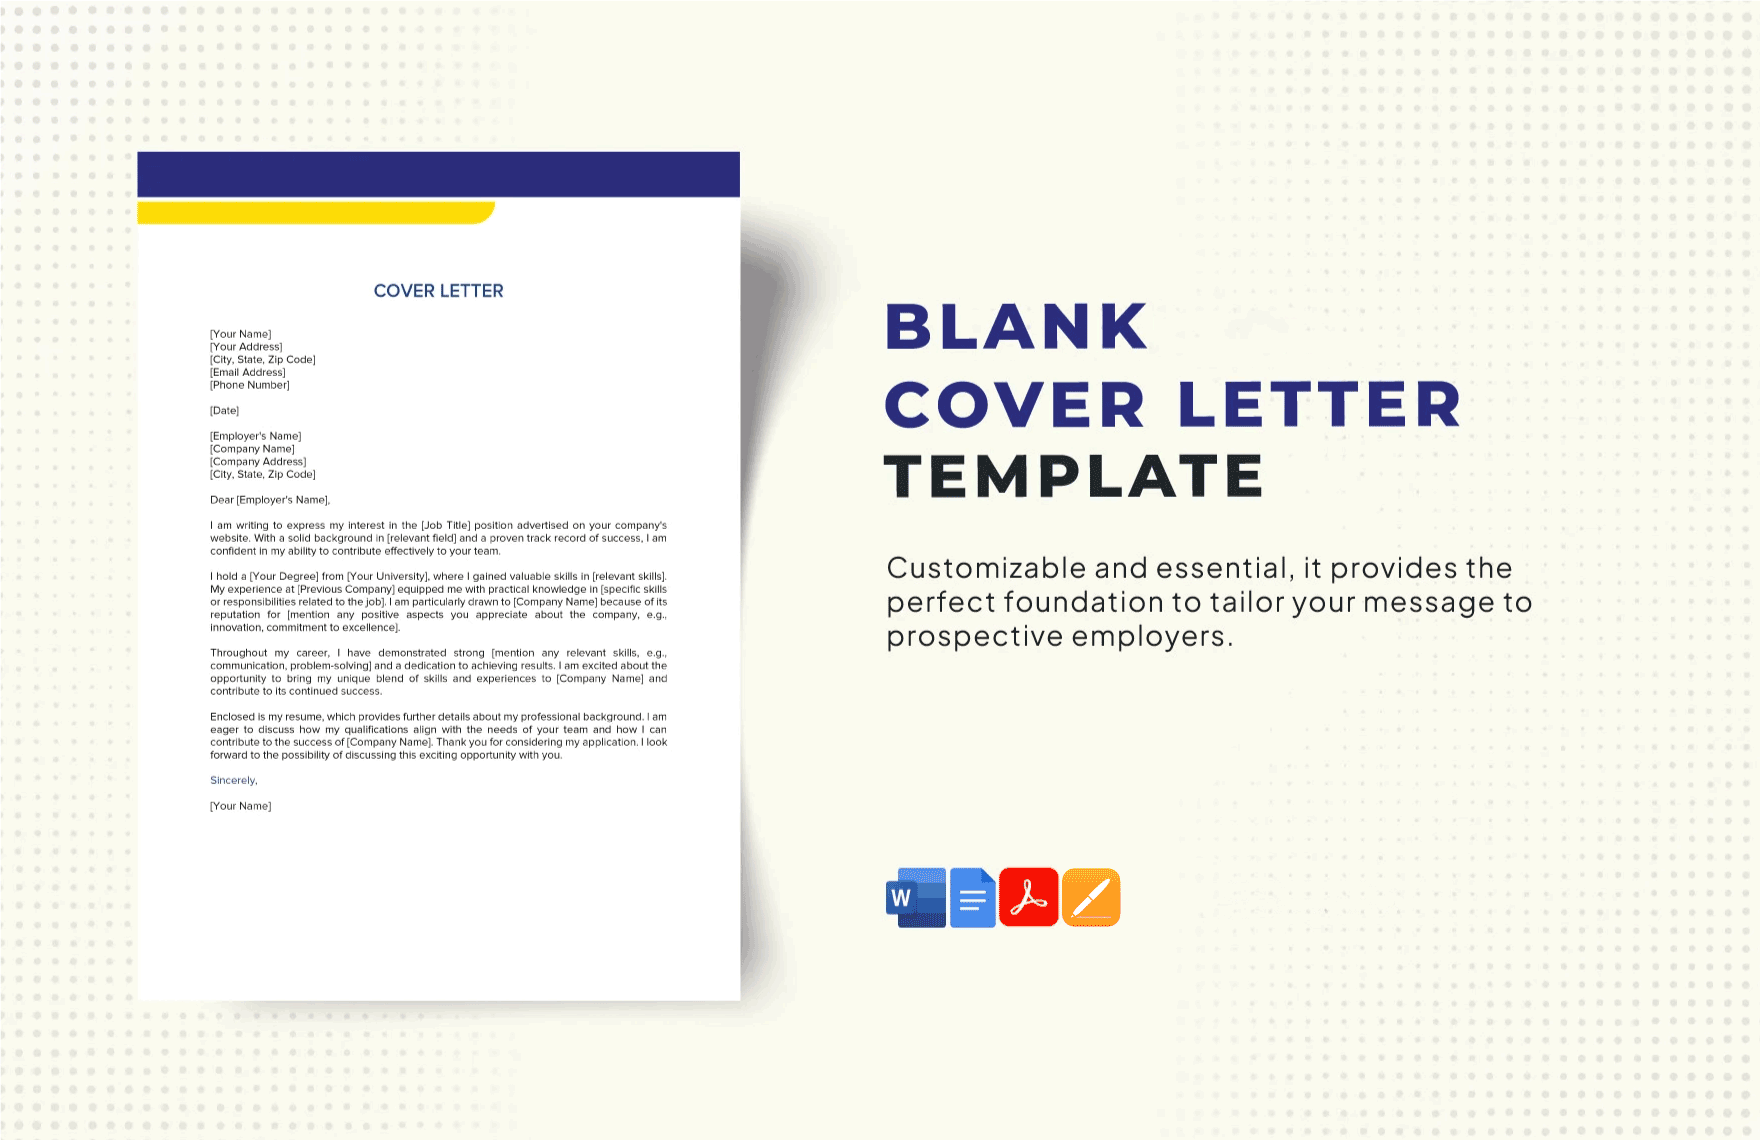 Free Blank Cover Letter Template in Word, Google Docs, PDF, Apple Pages